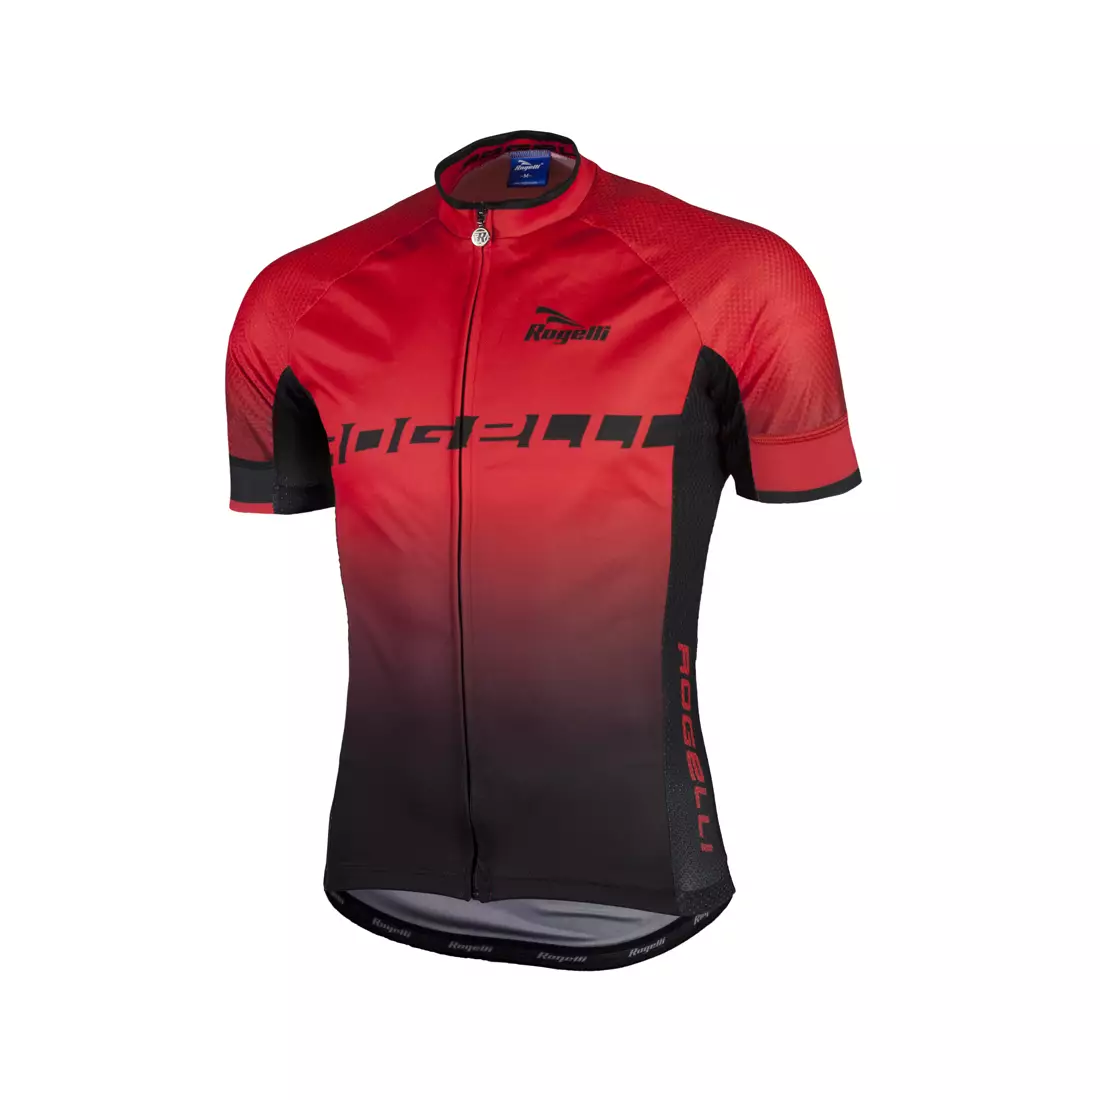 ROGELLI ISPIRATO cycling jersey, red-black 001.401